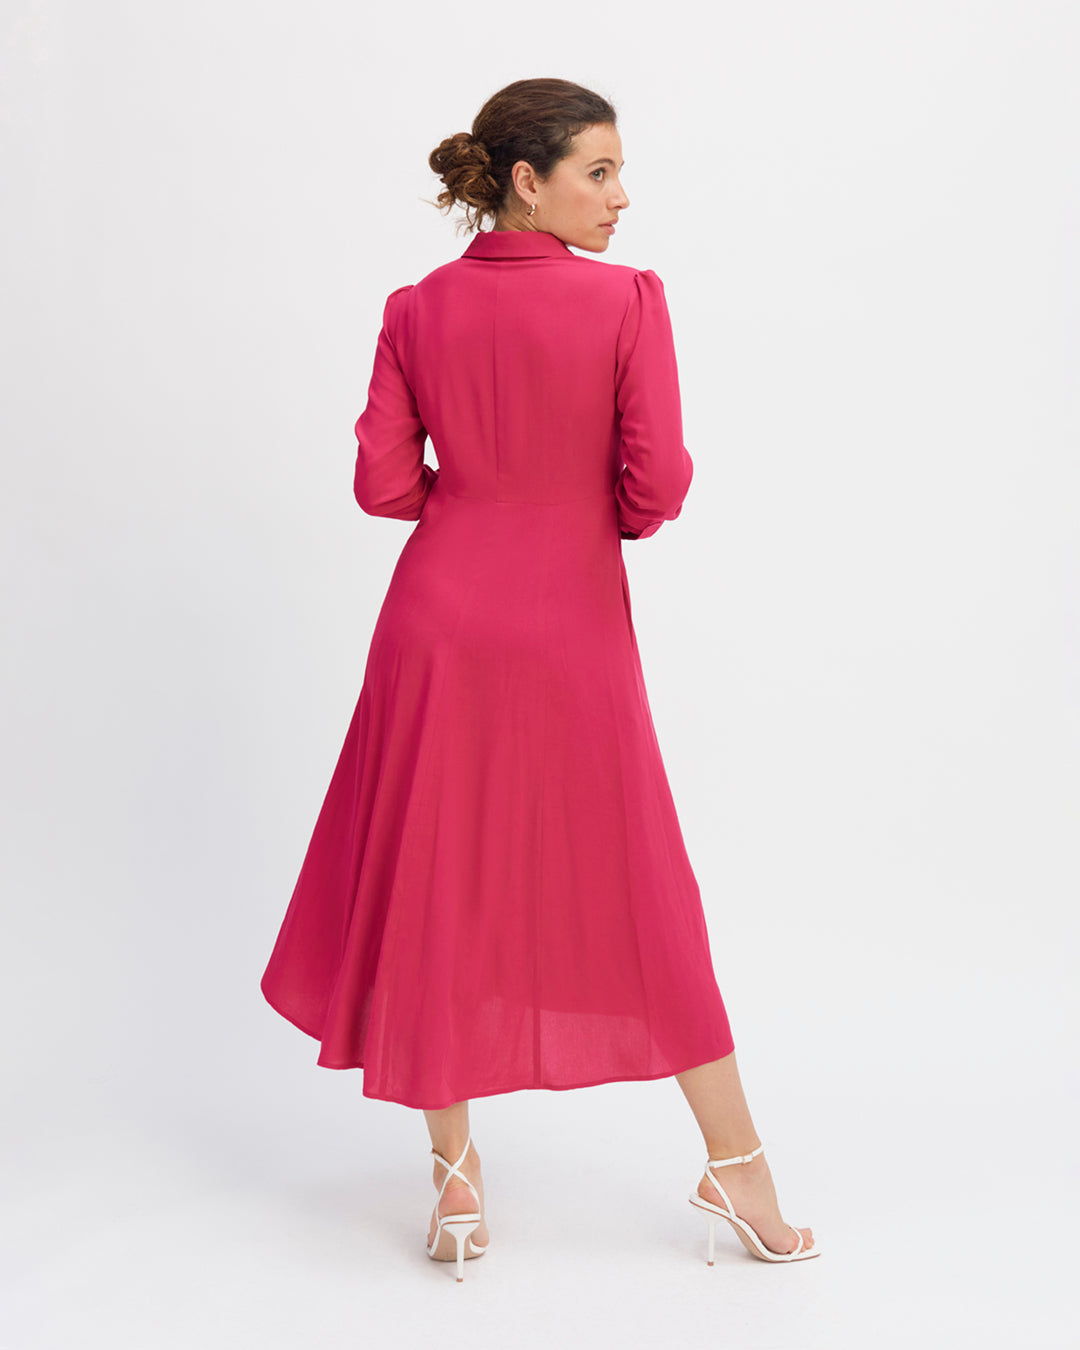 Dress-rose-Long-midday-Collar-blouse-Long-sleeves-with-buttoned-cuffs-Buttoned-flap-hidden-Curved-at-the-waist-17H10-tailors-for-women-paris-